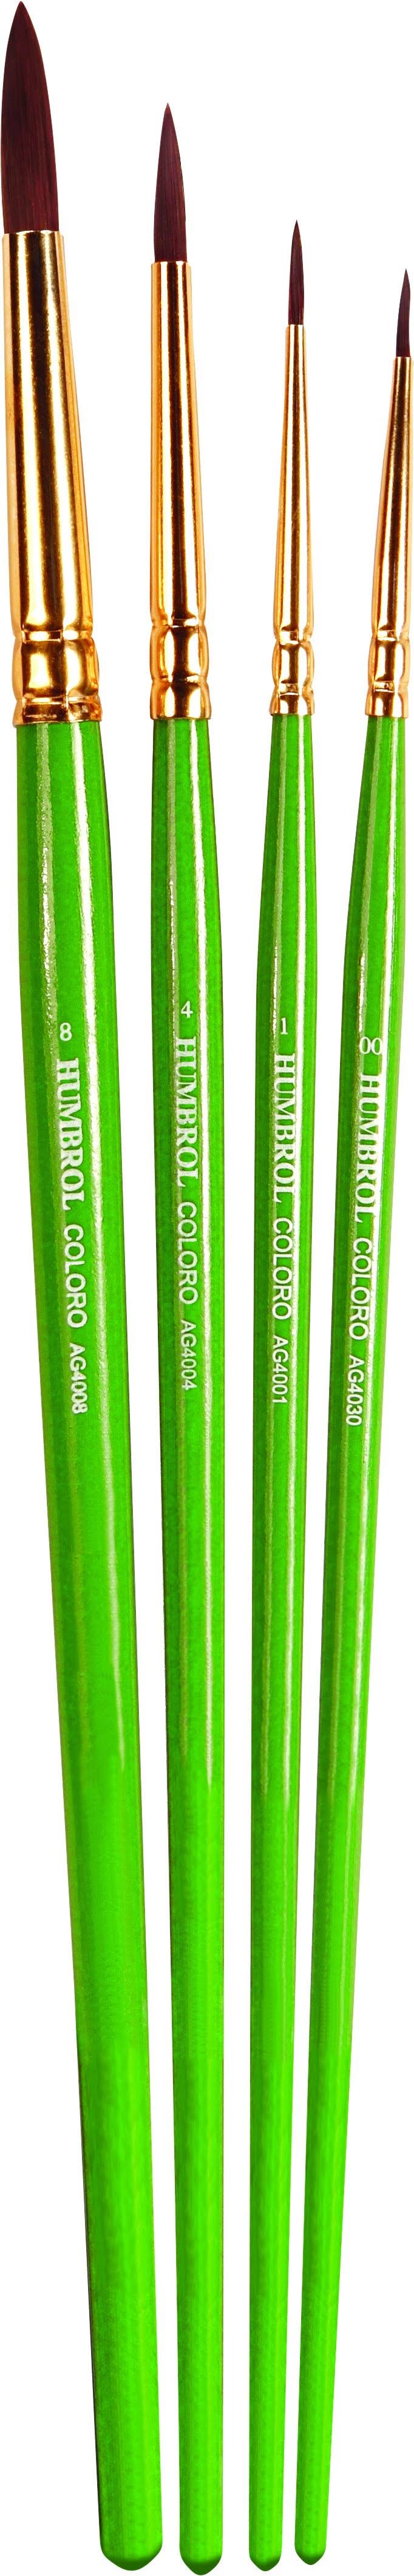 Humbrol Coloro Paint Brushes